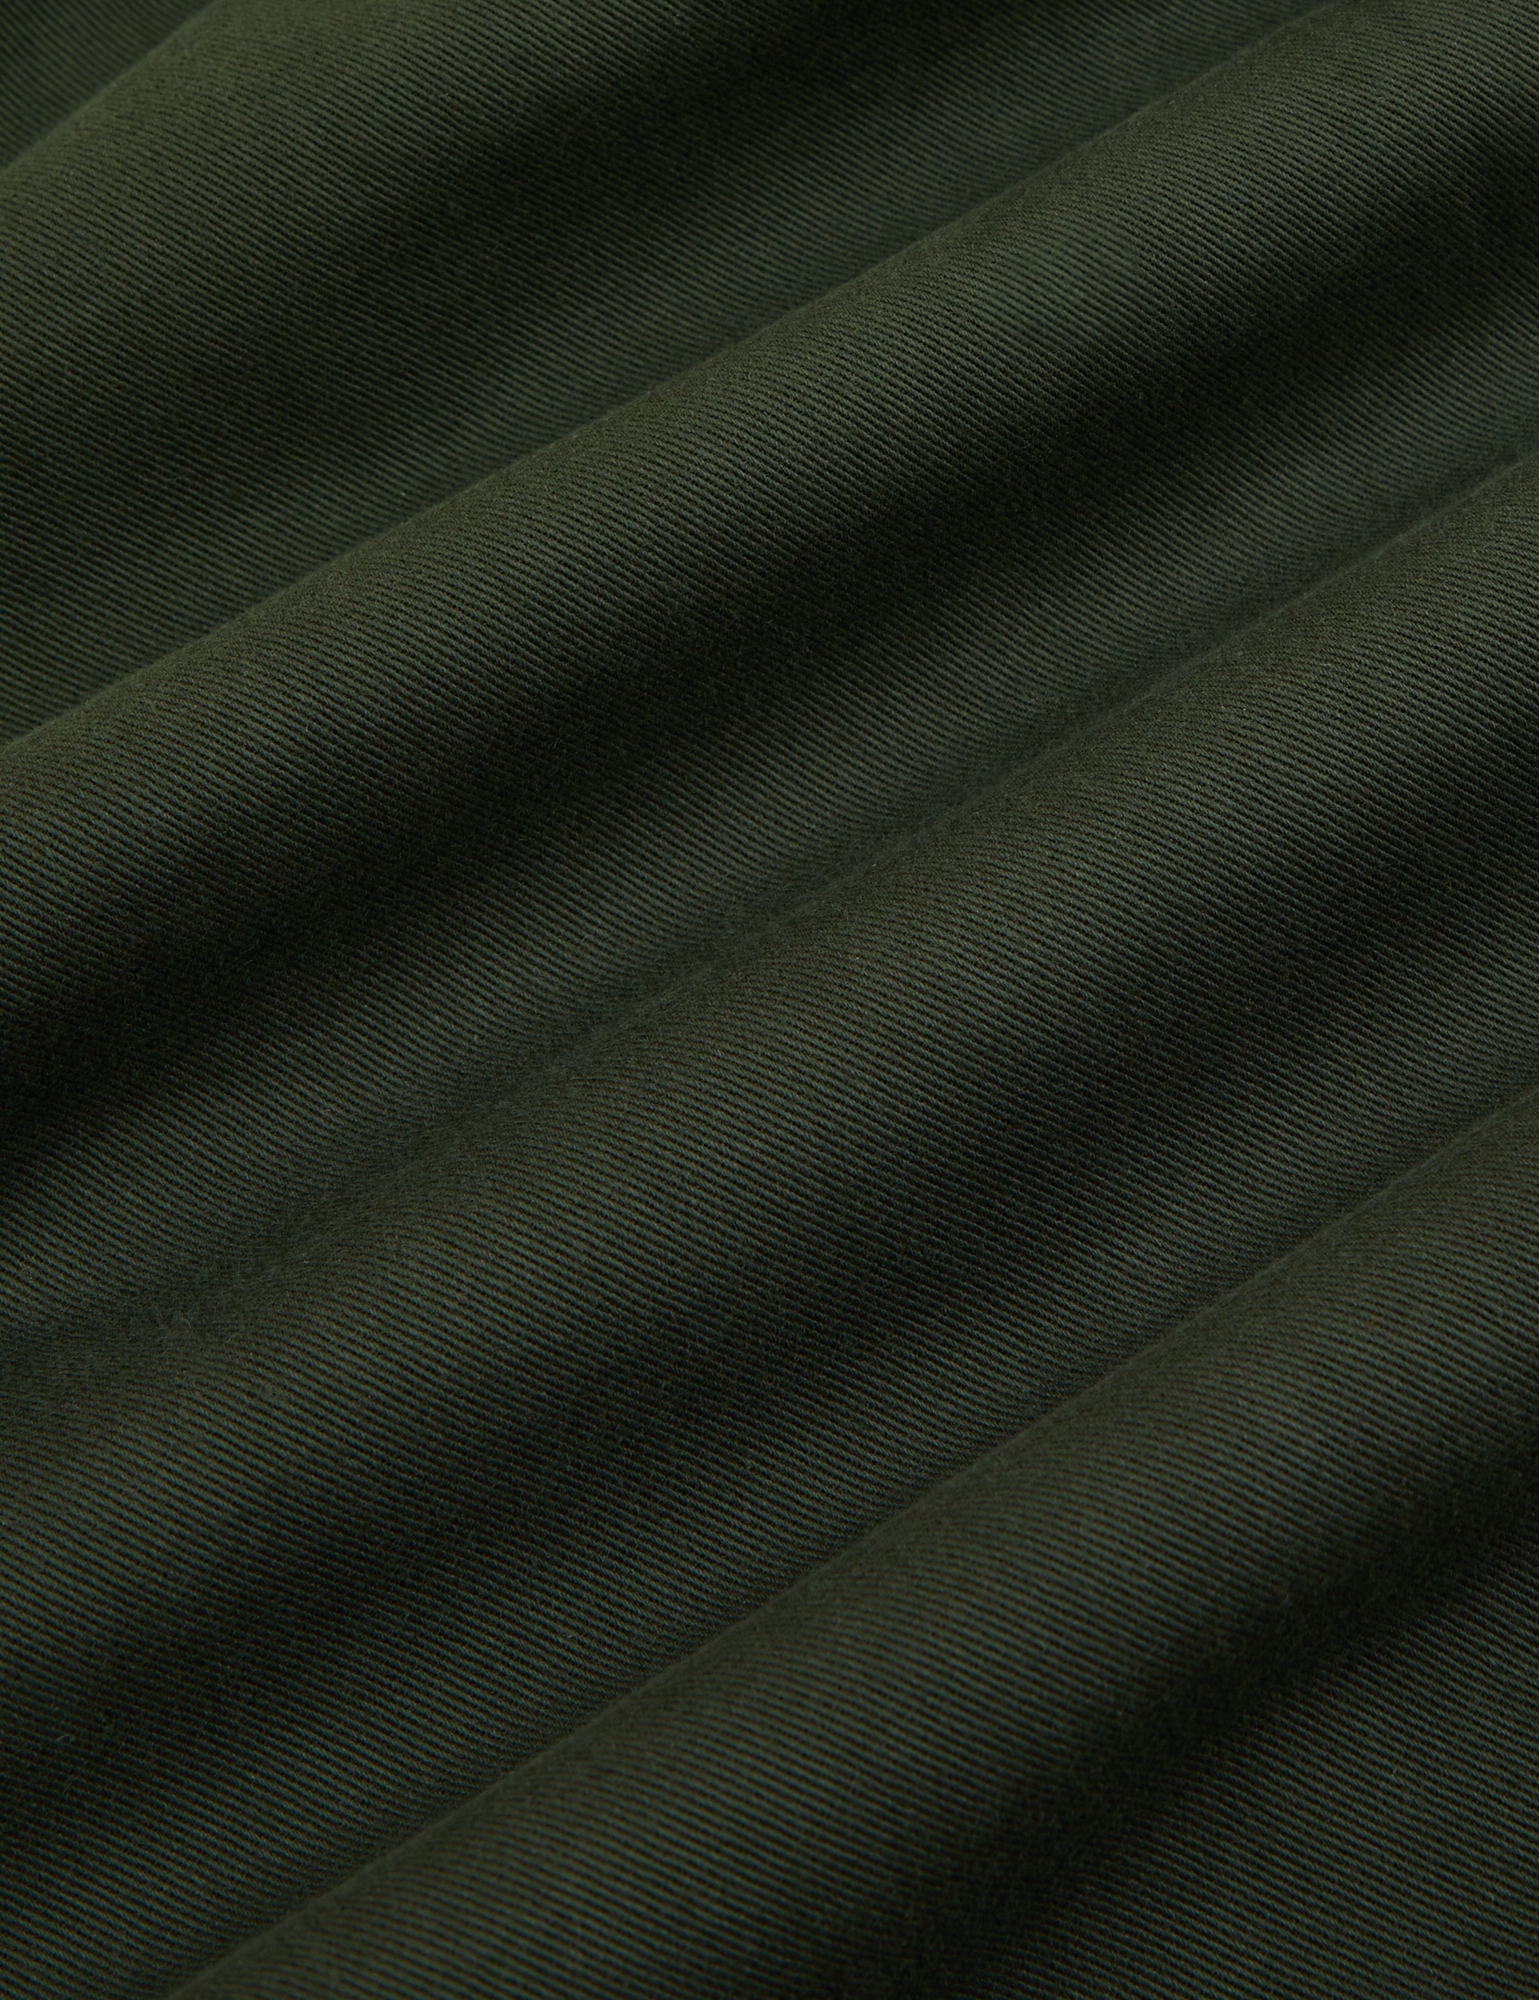 Trouser Shorts in Swamp Green fabric detail close up